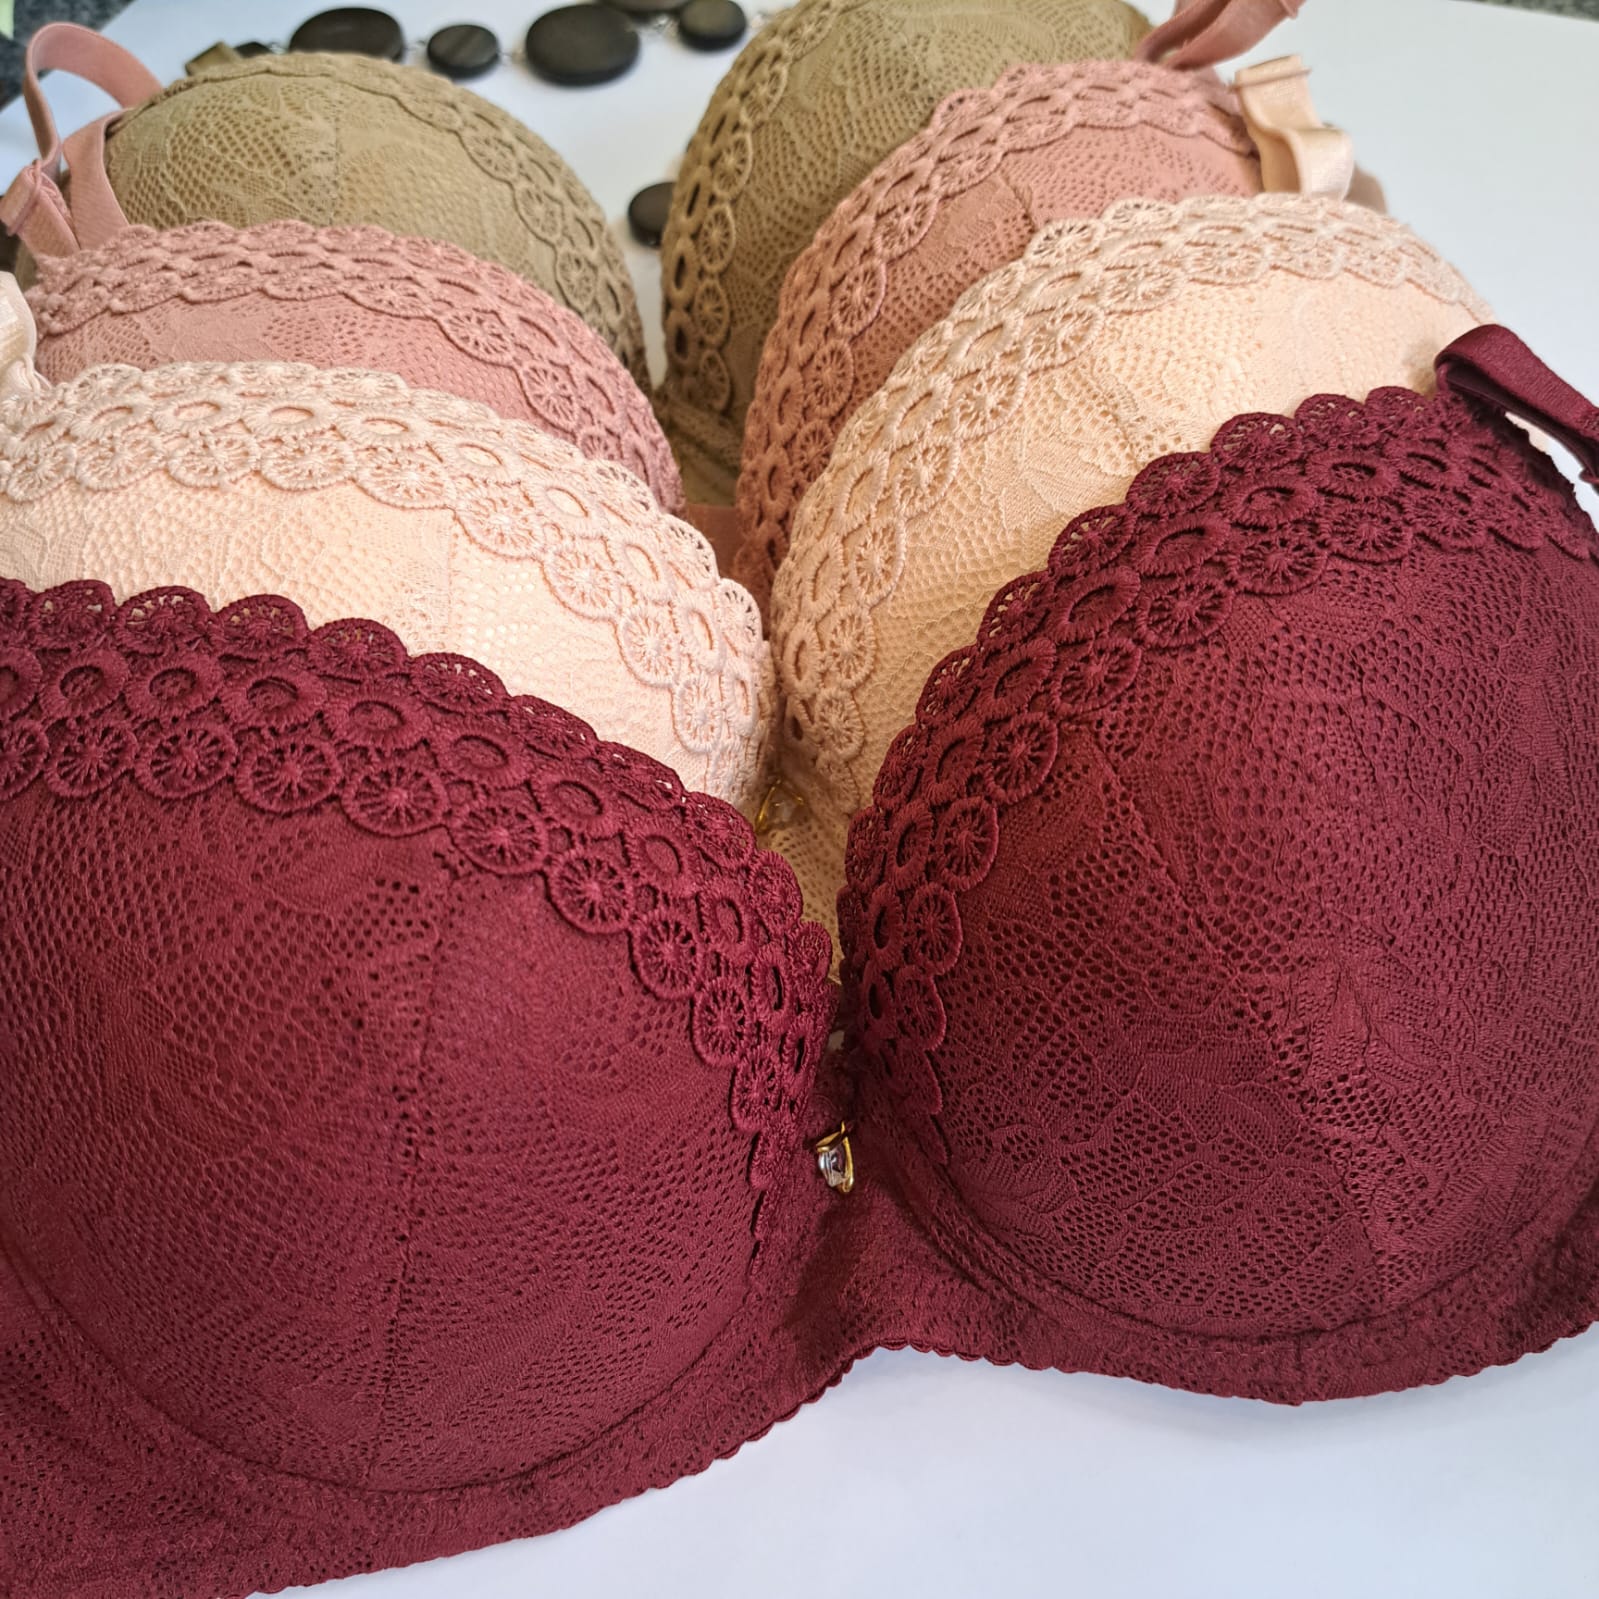 Stylish Lace Bras in Various Colors - Pack of 6